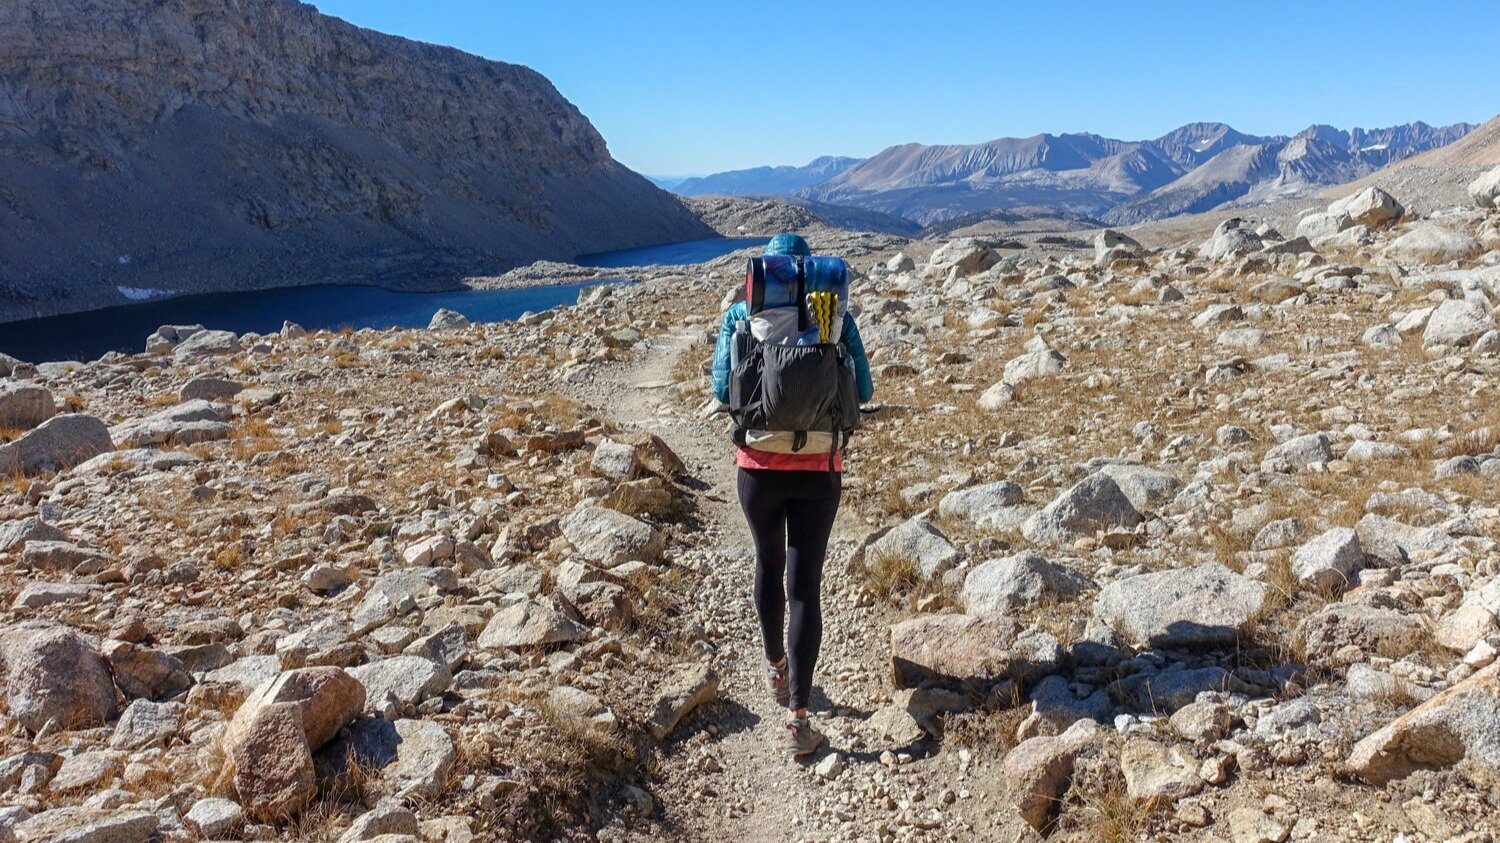 Annie hiking the JOhn Muir Trail with the Hyperlite Mountain Gear SOuthwest 2400 backpack.